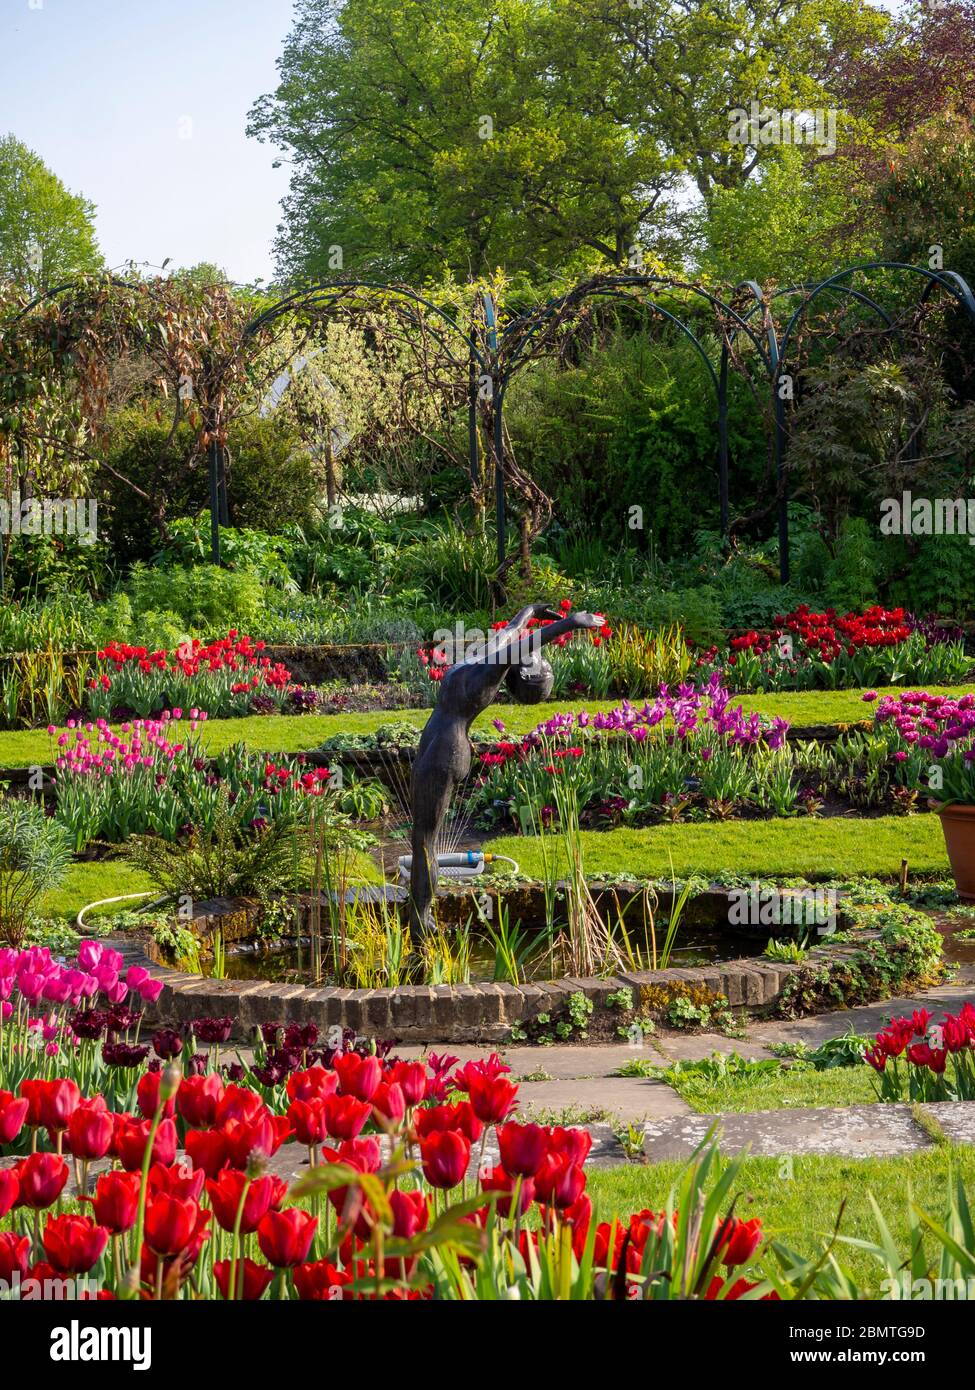 Red and purple tulips in the sunken garden at Chenies with ornamental pond. Statue of a diver reaches up skywards. Stock Photo